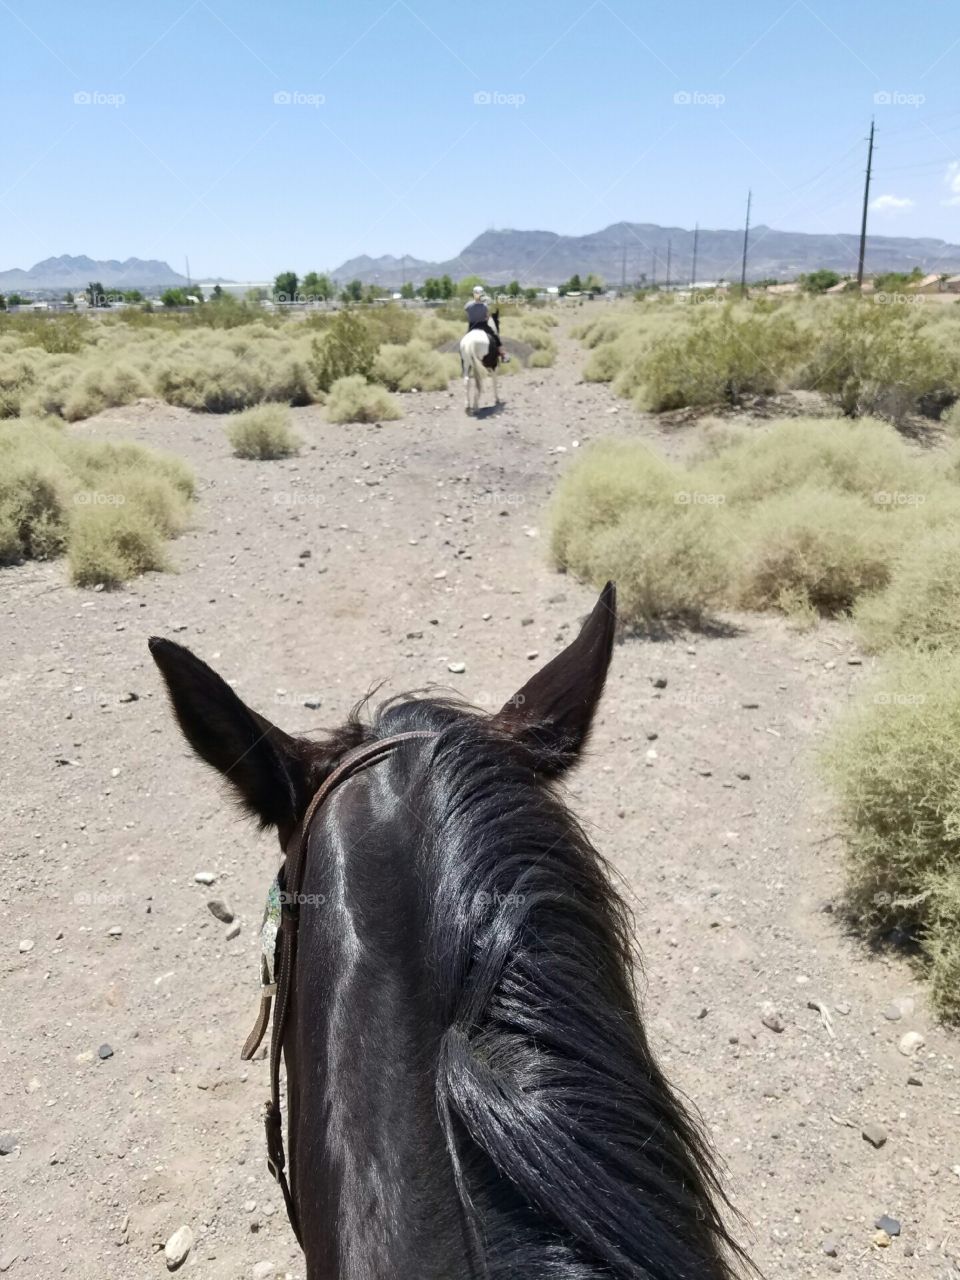 Trail ride on a horse in the desert seen from behind.